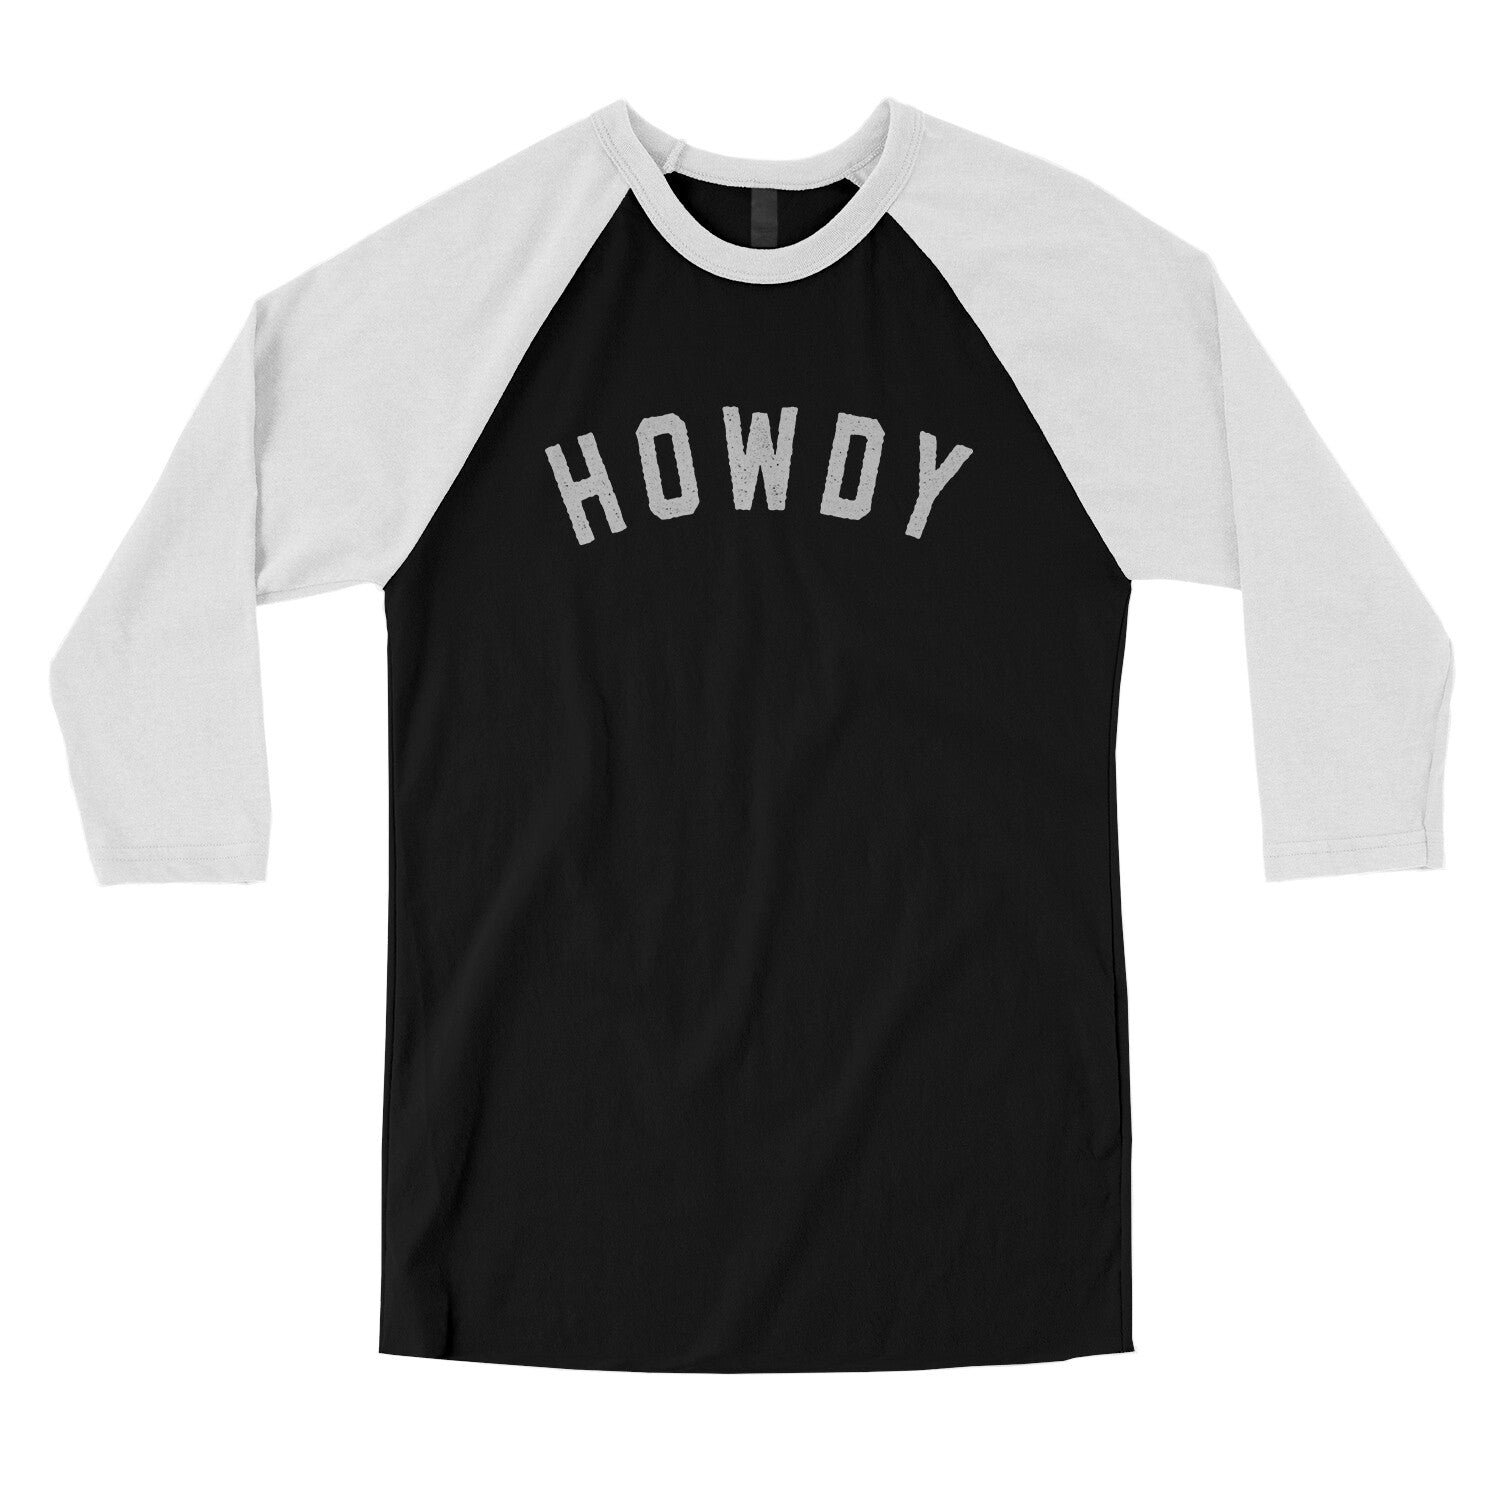 Howdy in Black with White Color